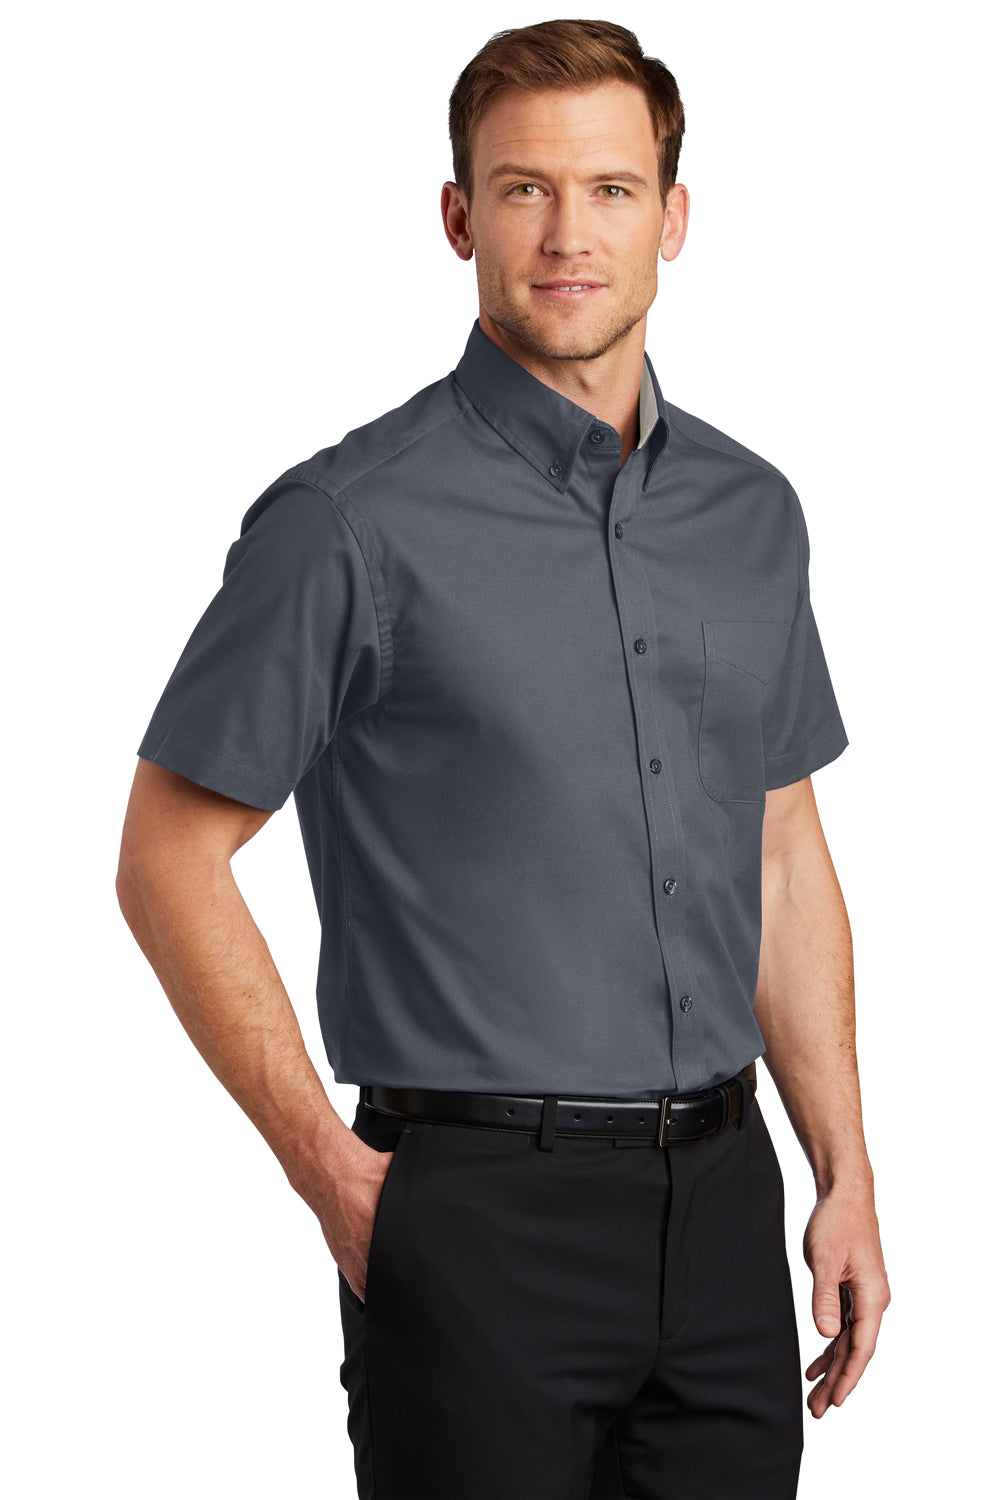 Port Authority S508/TLS508 Mens Easy Care Wrinkle Resistant Short Sleeve Button Down Shirt w/ Pocket Steel Grey 3Q